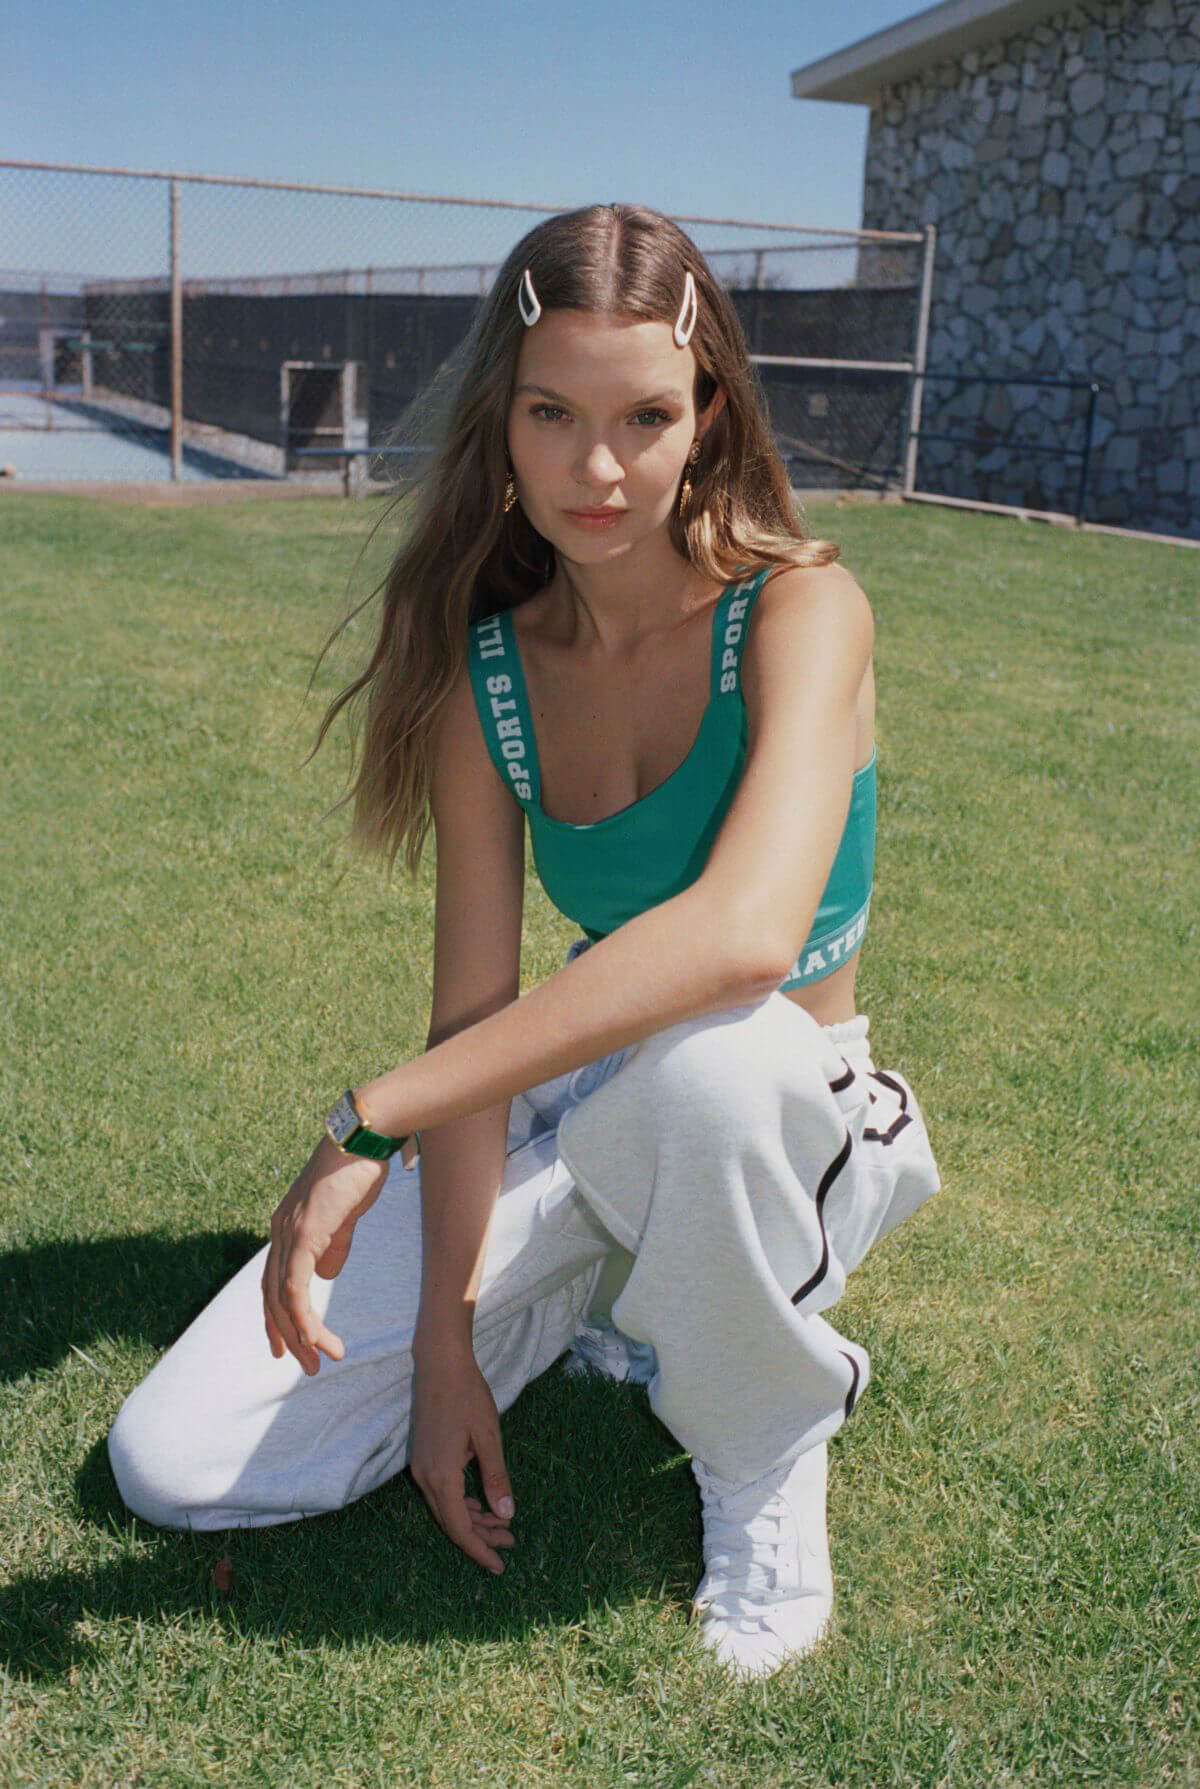 Josephine Skriver Photoshoot for Nasty Gal x Sports Illustrated, December 2021